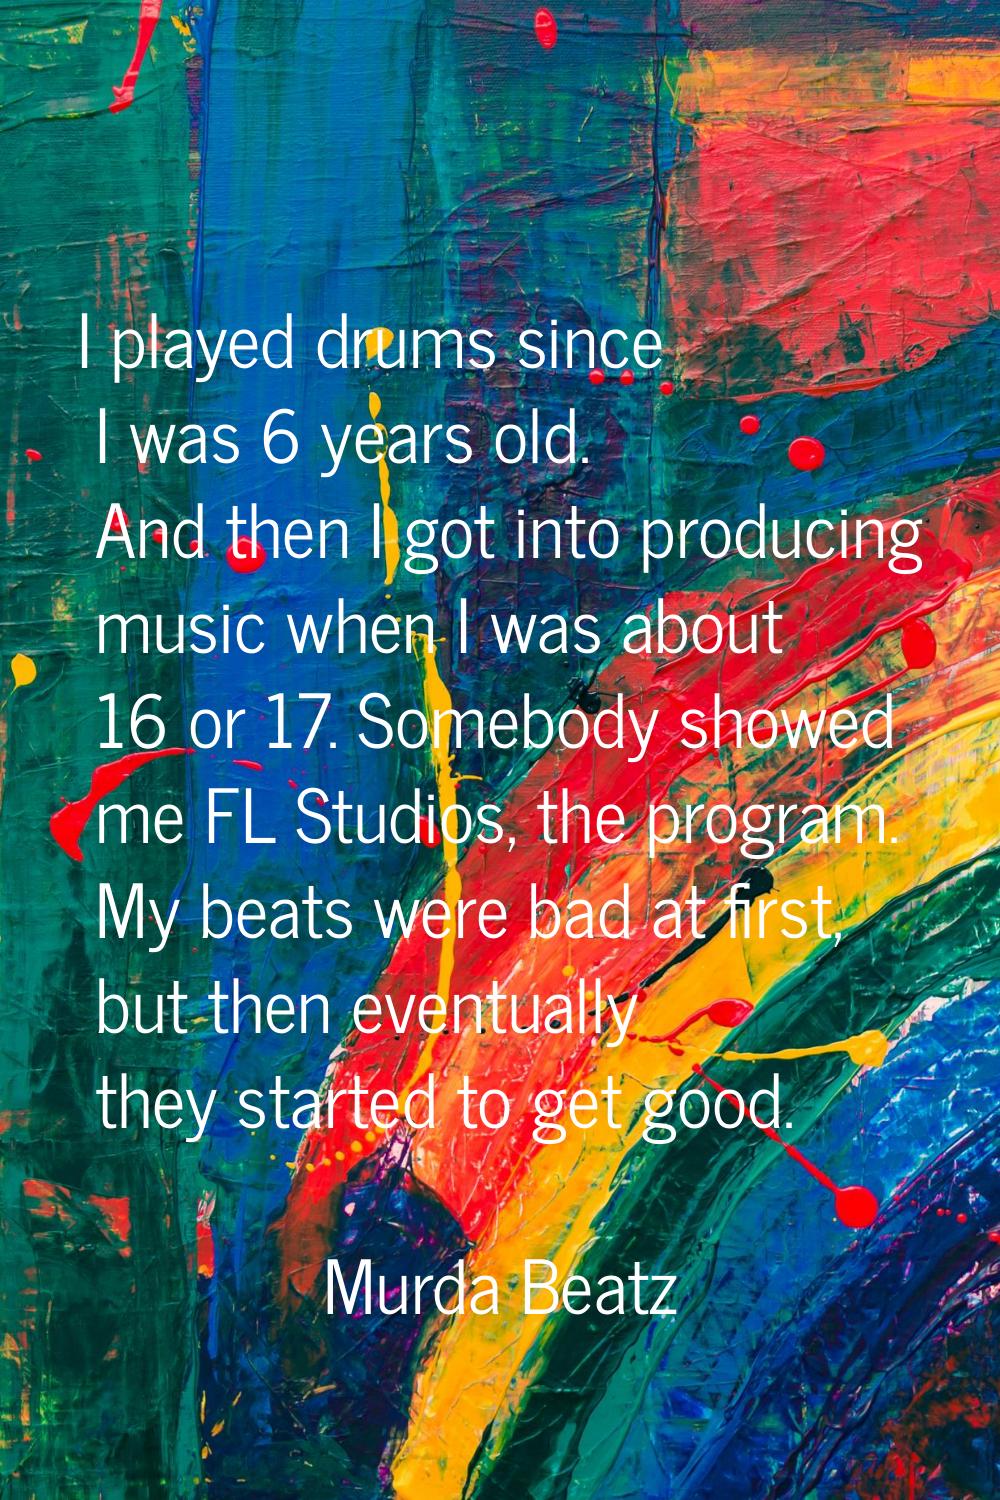 I played drums since I was 6 years old. And then I got into producing music when I was about 16 or 